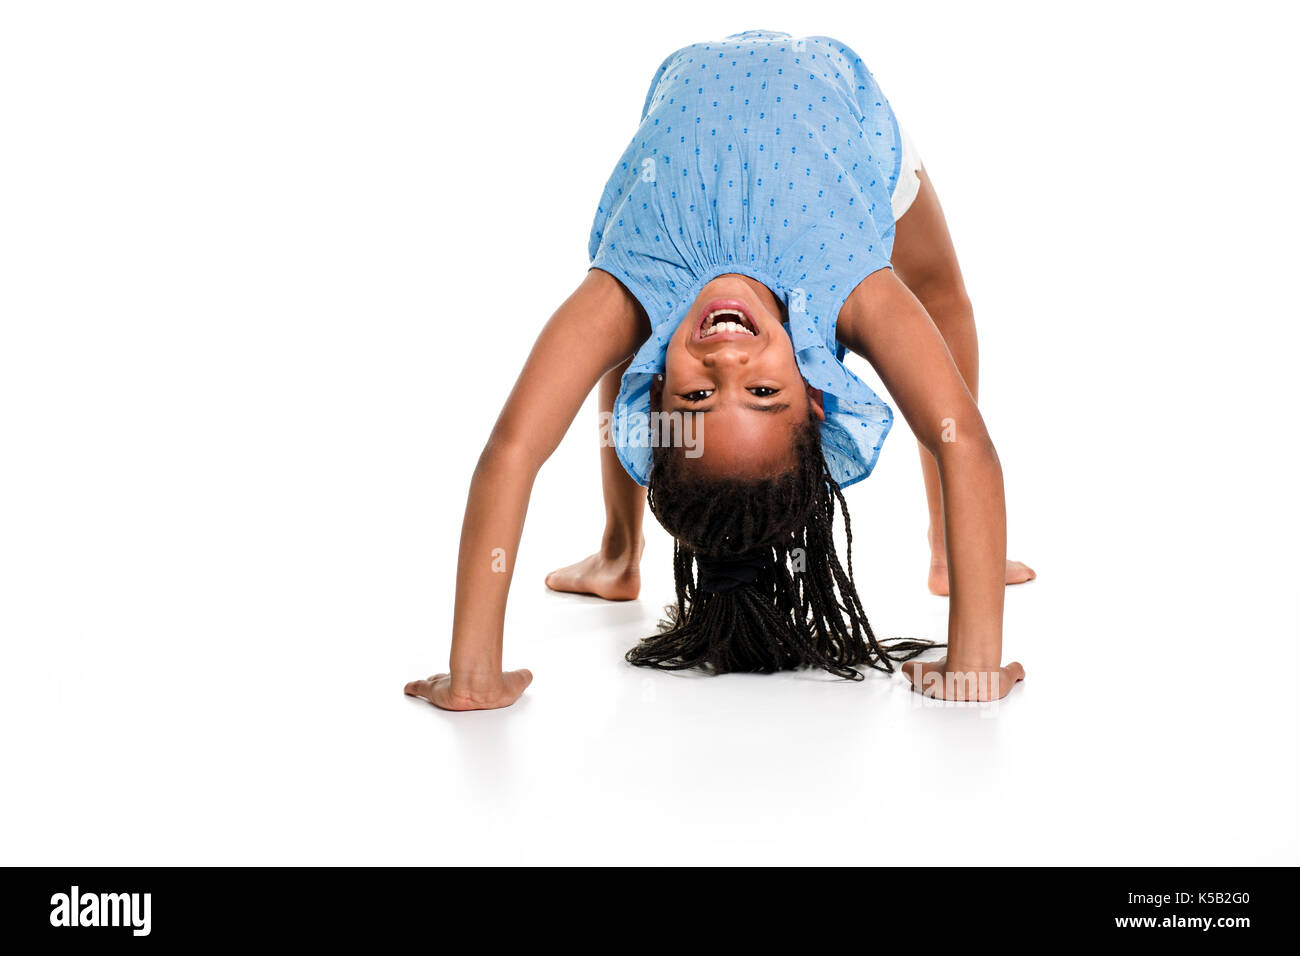 little girl upside down on a white background Stock Photo